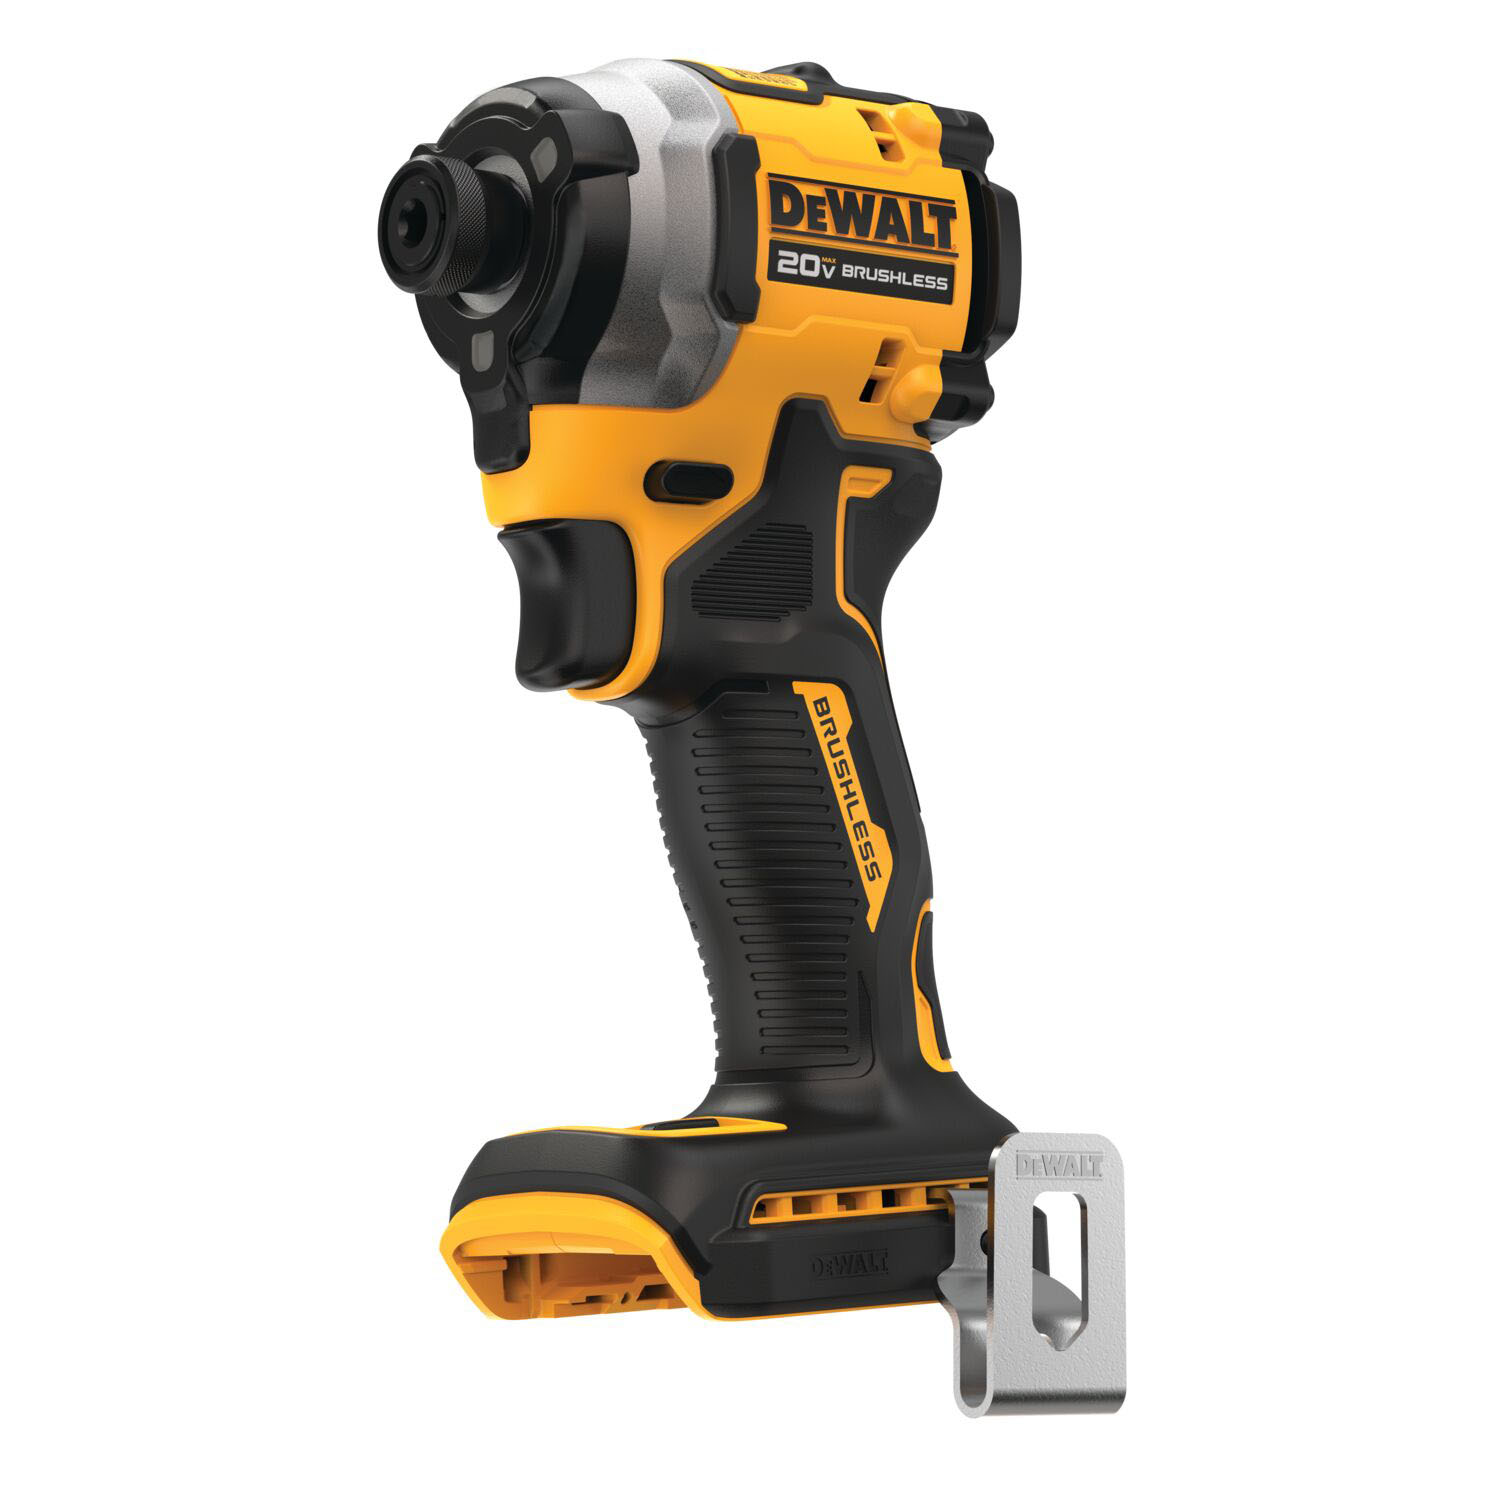 ATOMIC 20V MAX BRUSHLESS CORDLESS 3-SPEED 1/4 IN. IMPACT DRIVER (TOOL ONLY)